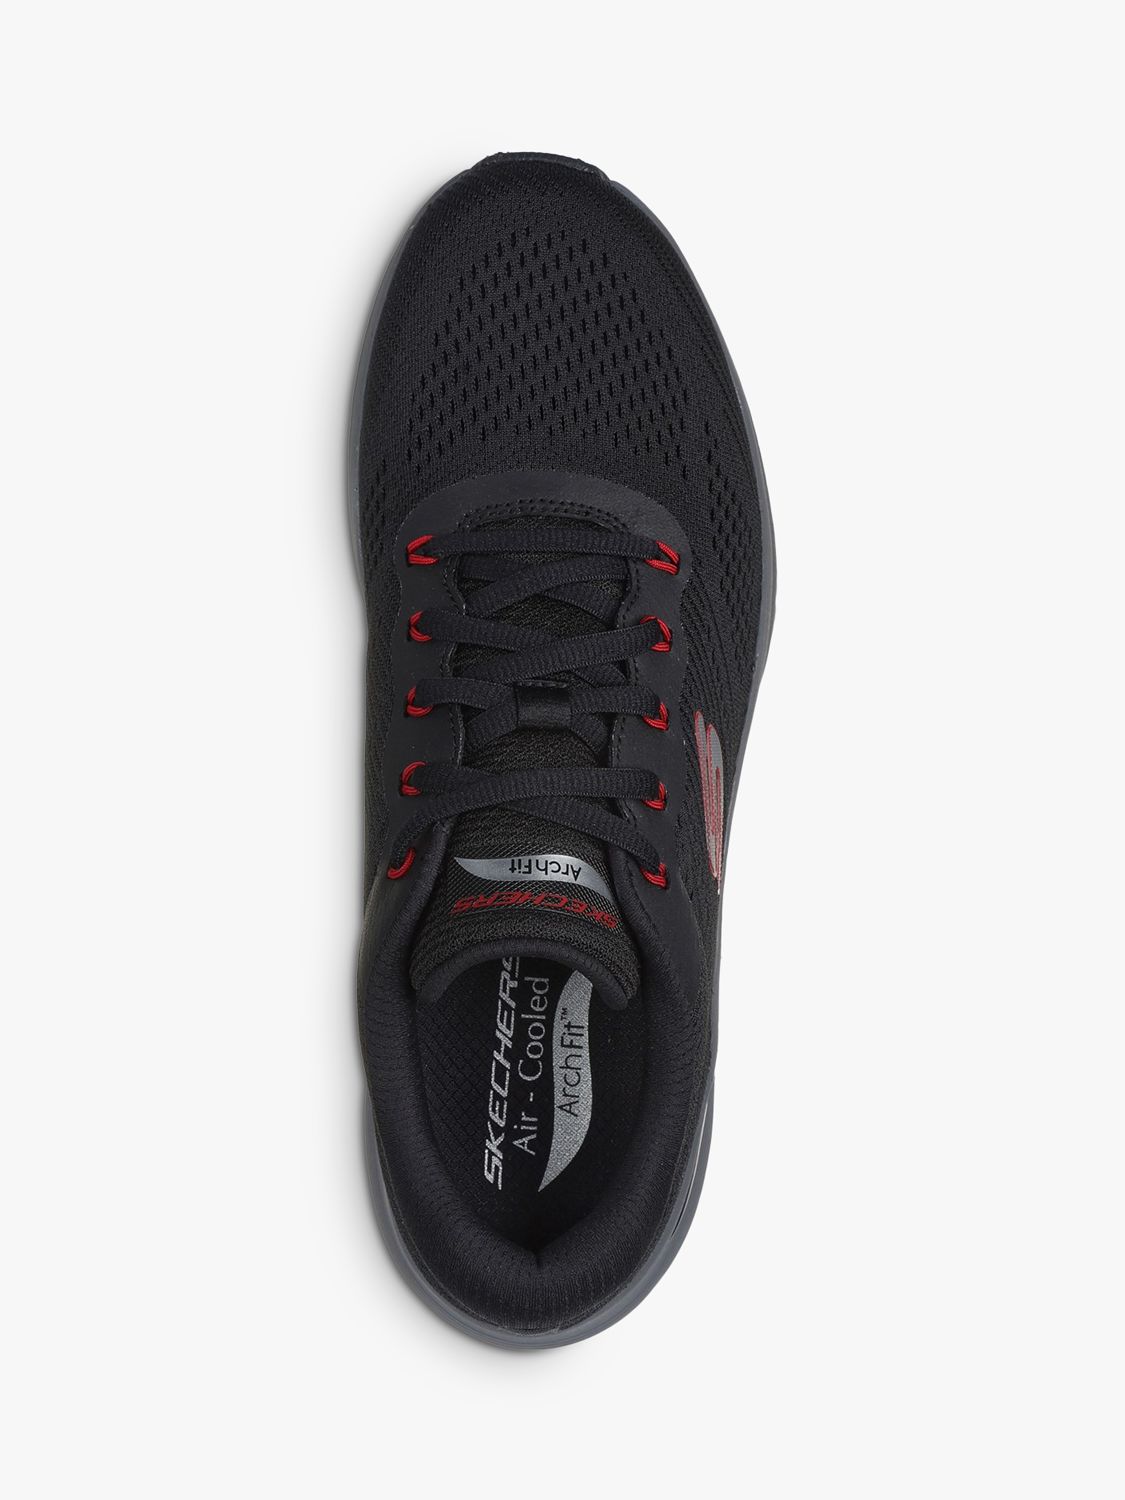 Skechers Arch Fit 2.0 Trainers, Black/Red at John Lewis & Partners